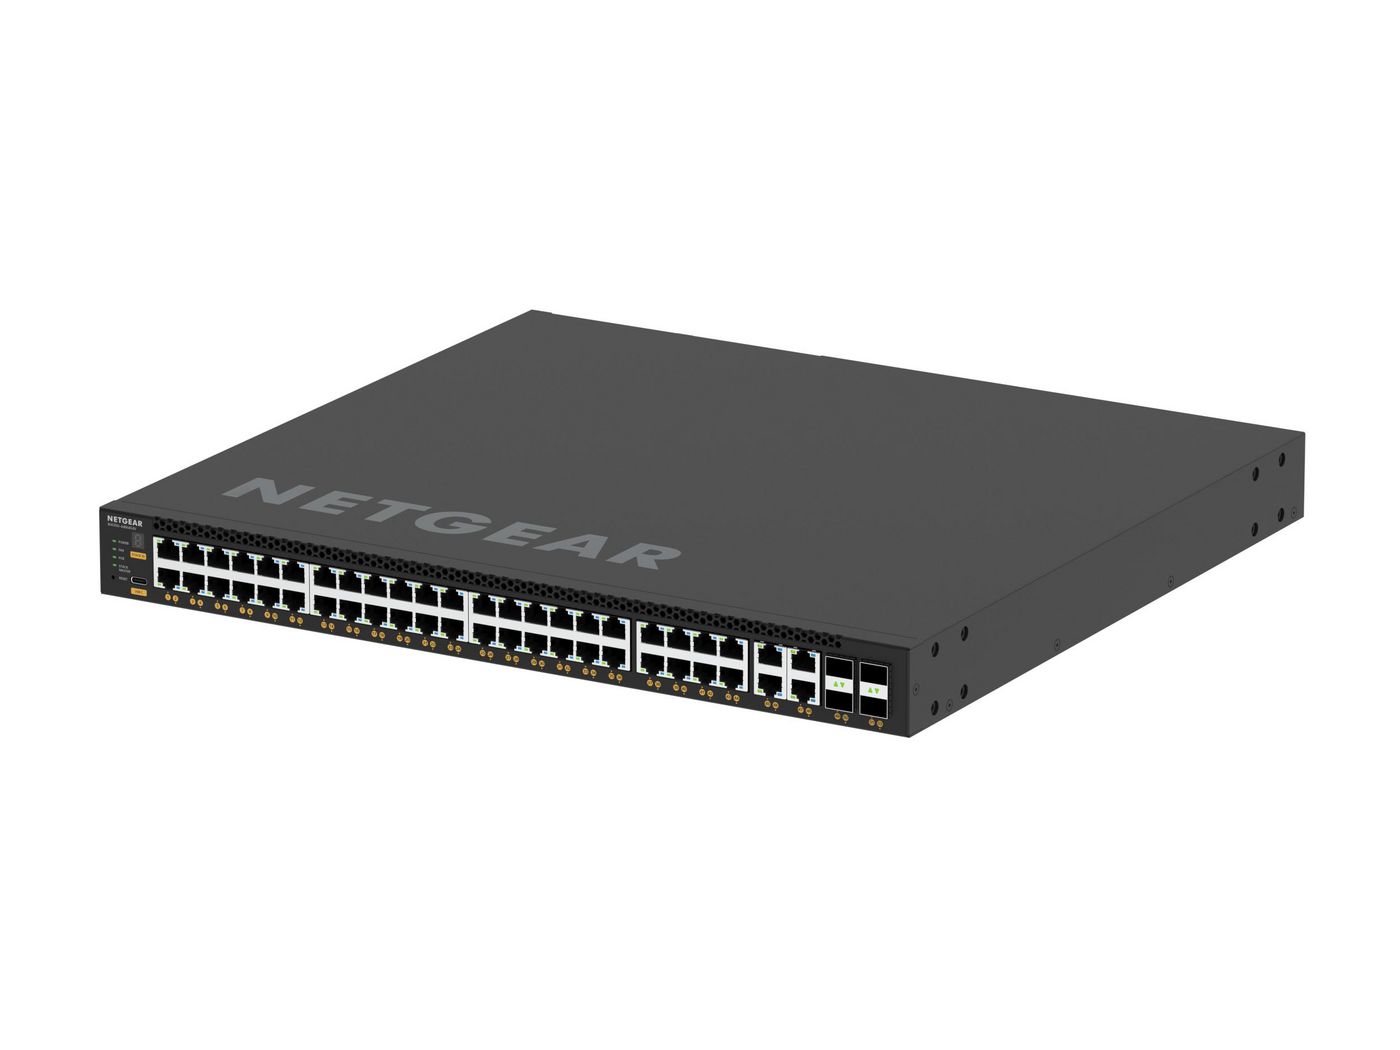 NETGEAR M4350-44M4X4V (MSM4352)-44x2.5G, 4x10G/Multi-gig PoE++ (194W base, up to 3,314W) and 4xSFP28